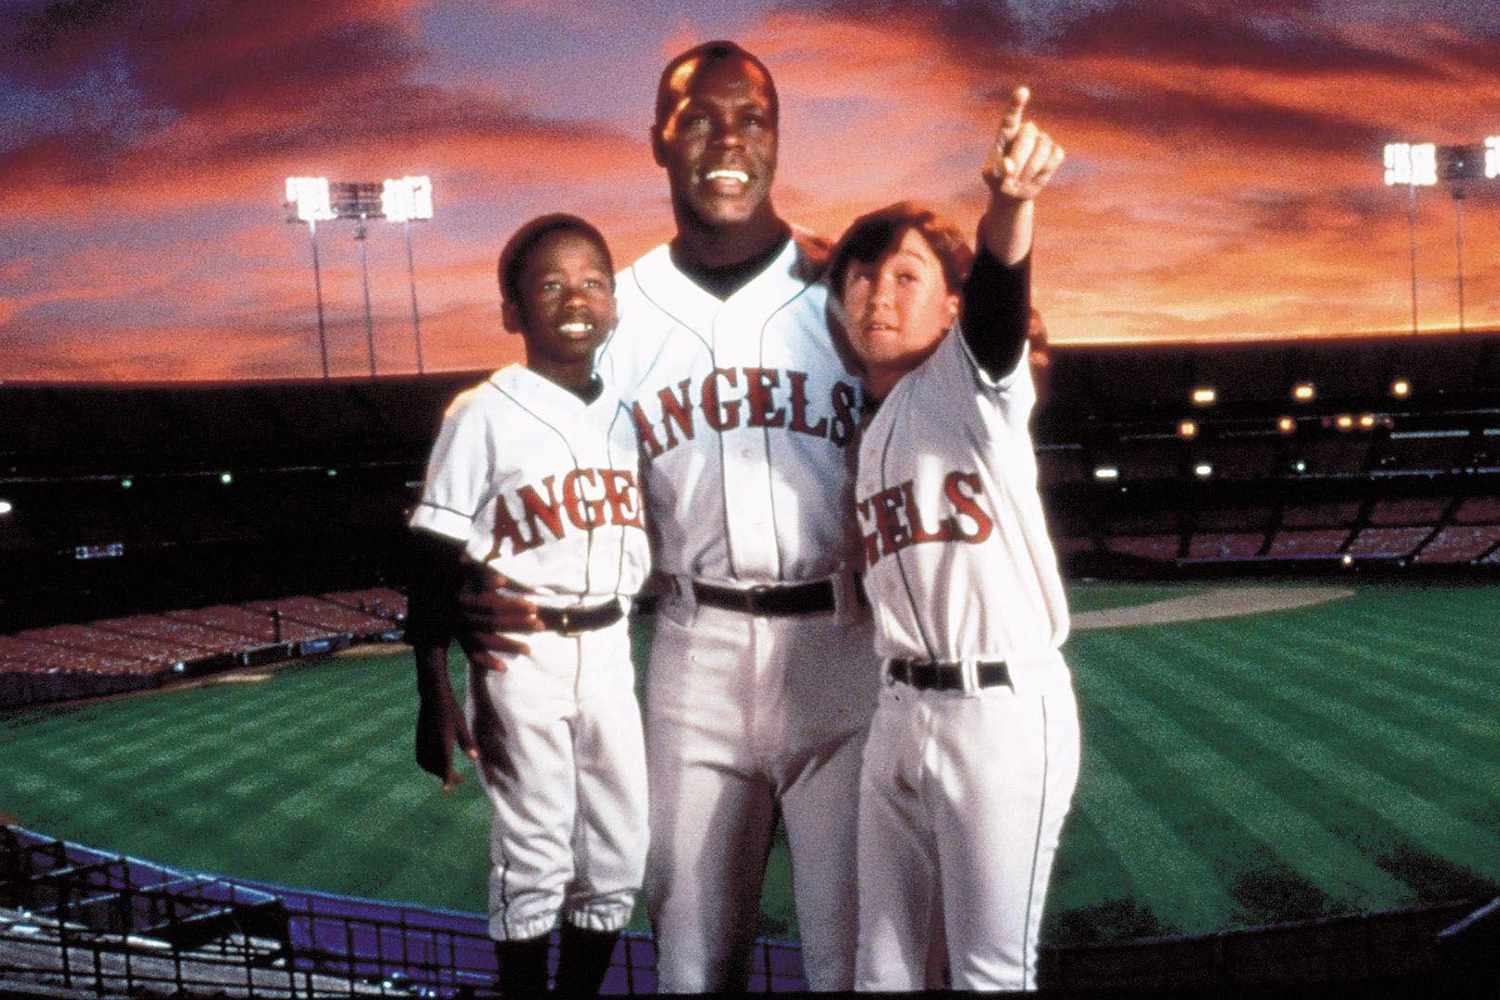 The Cast of 'Angels in the Outfield': Where Are They Now?